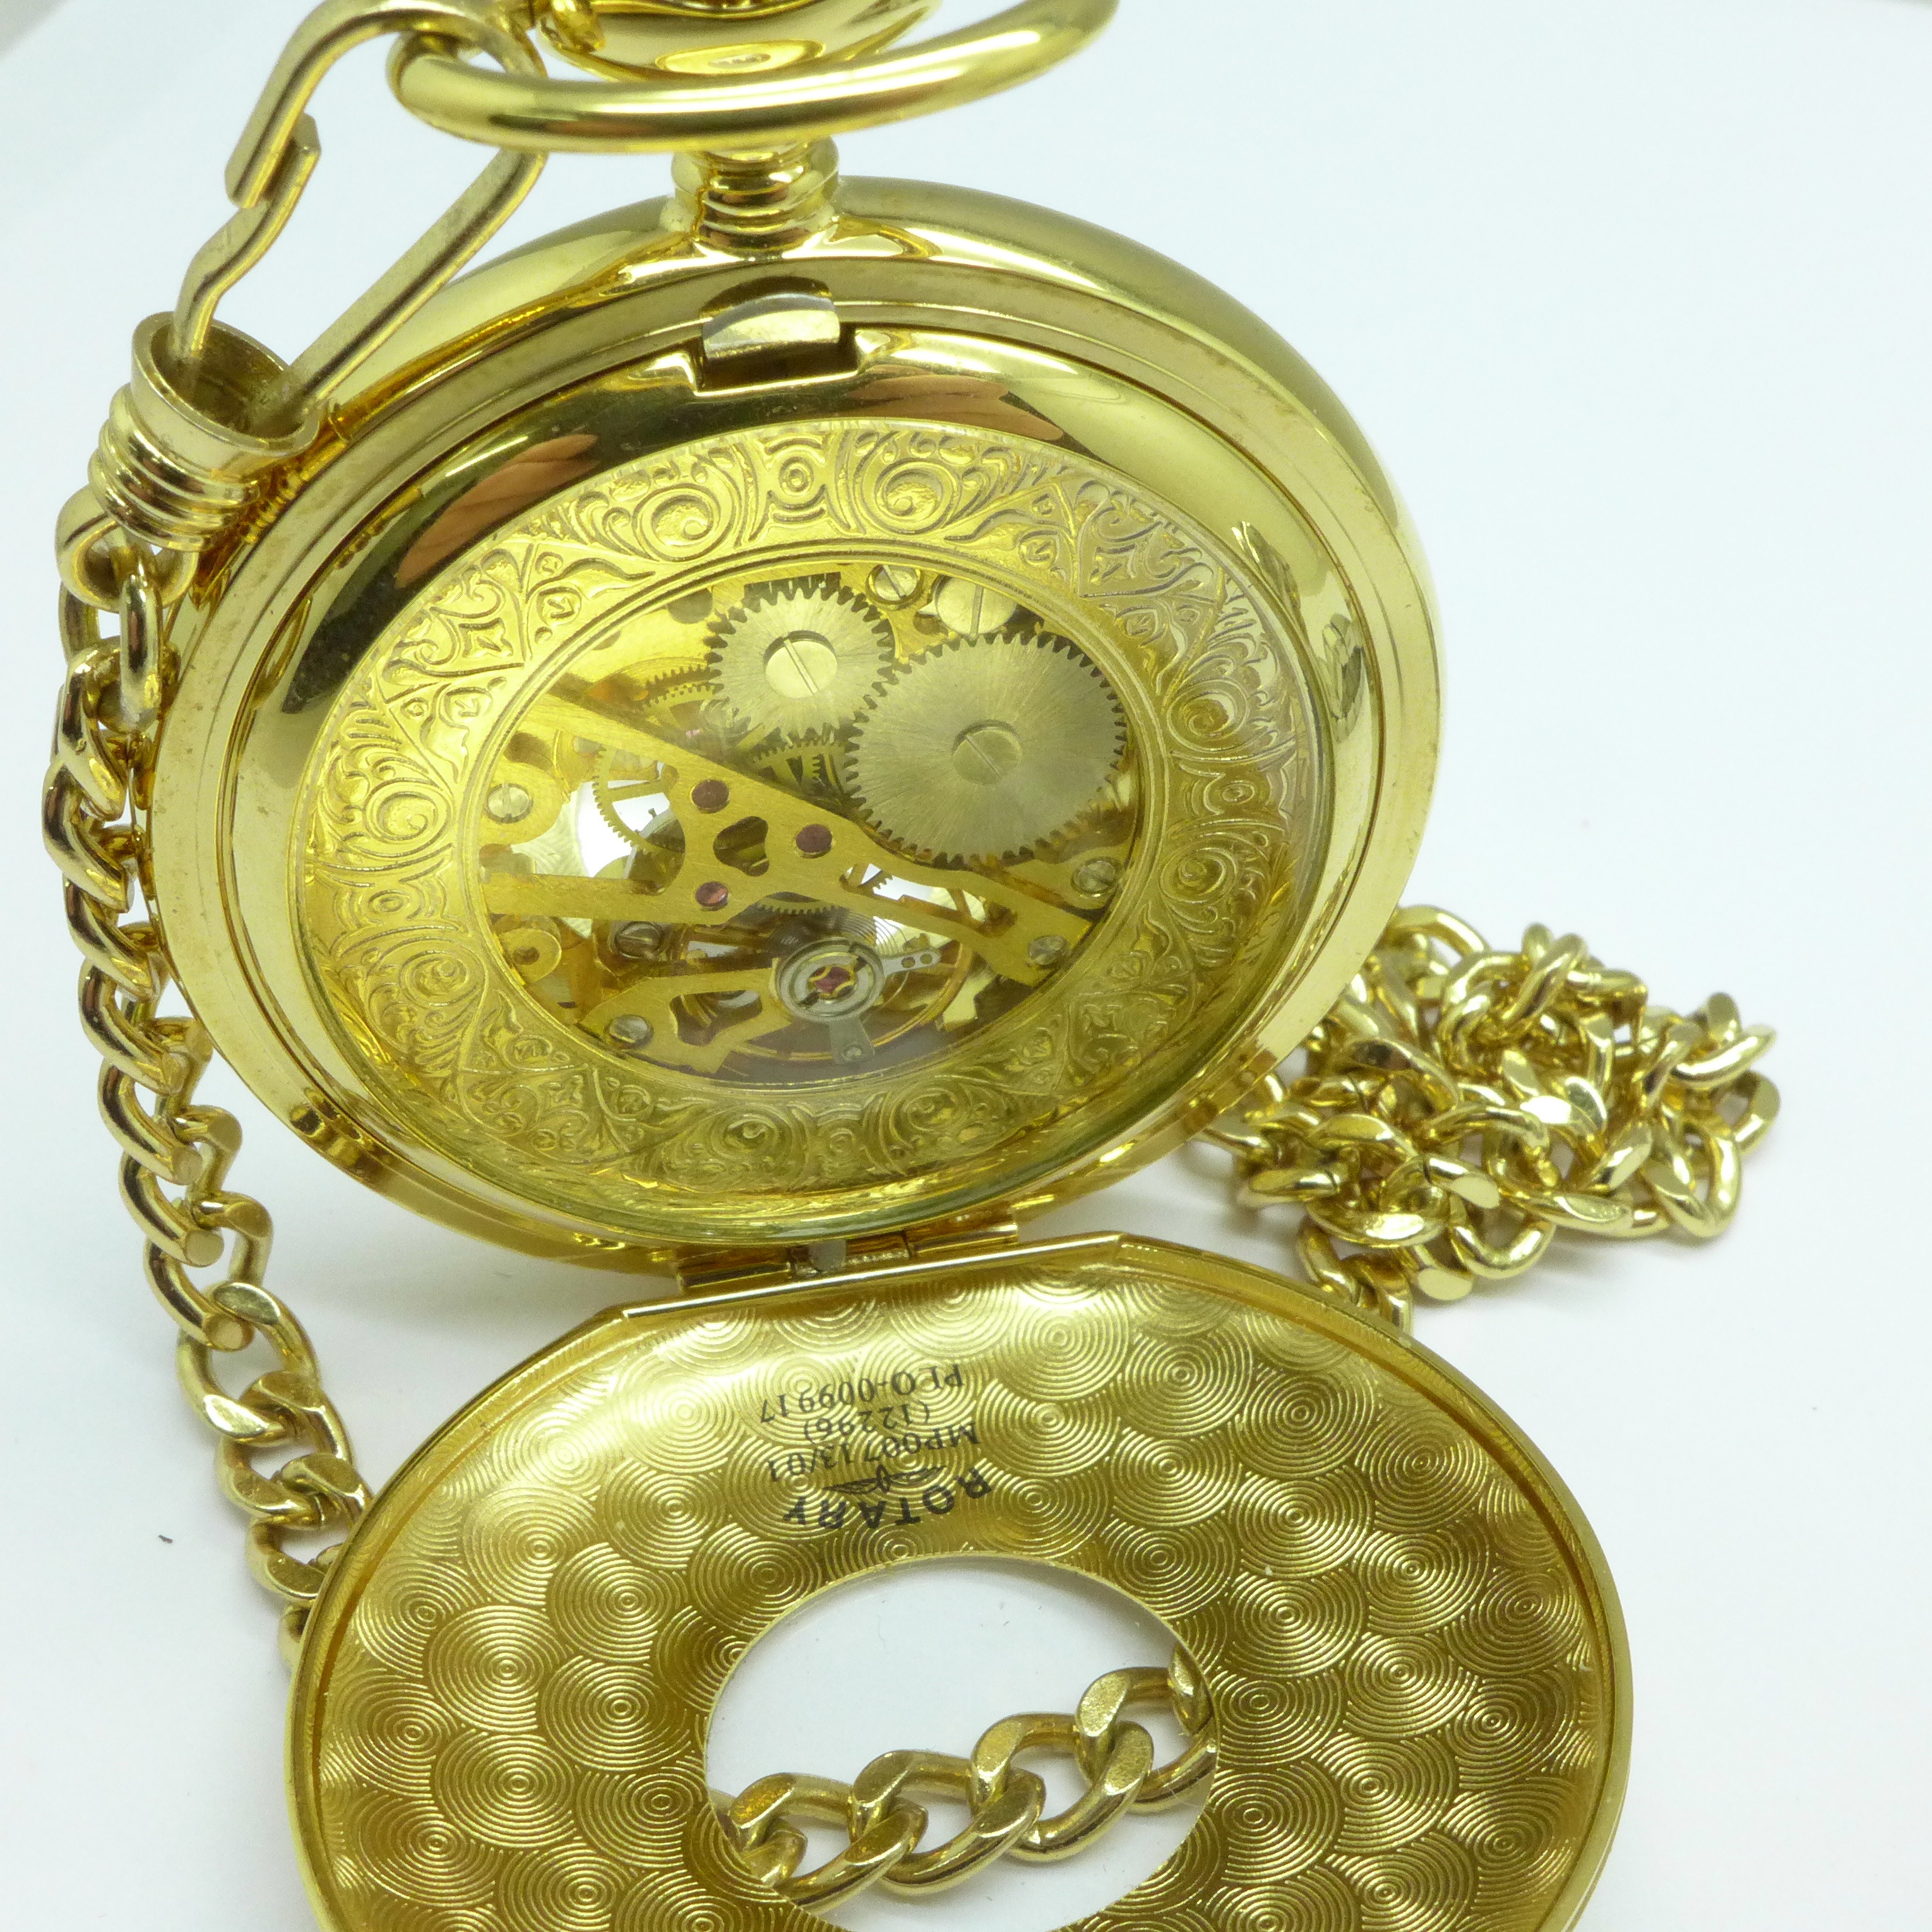 A Swatch wristwatch and a modern Rotary pocket watch - Image 3 of 3